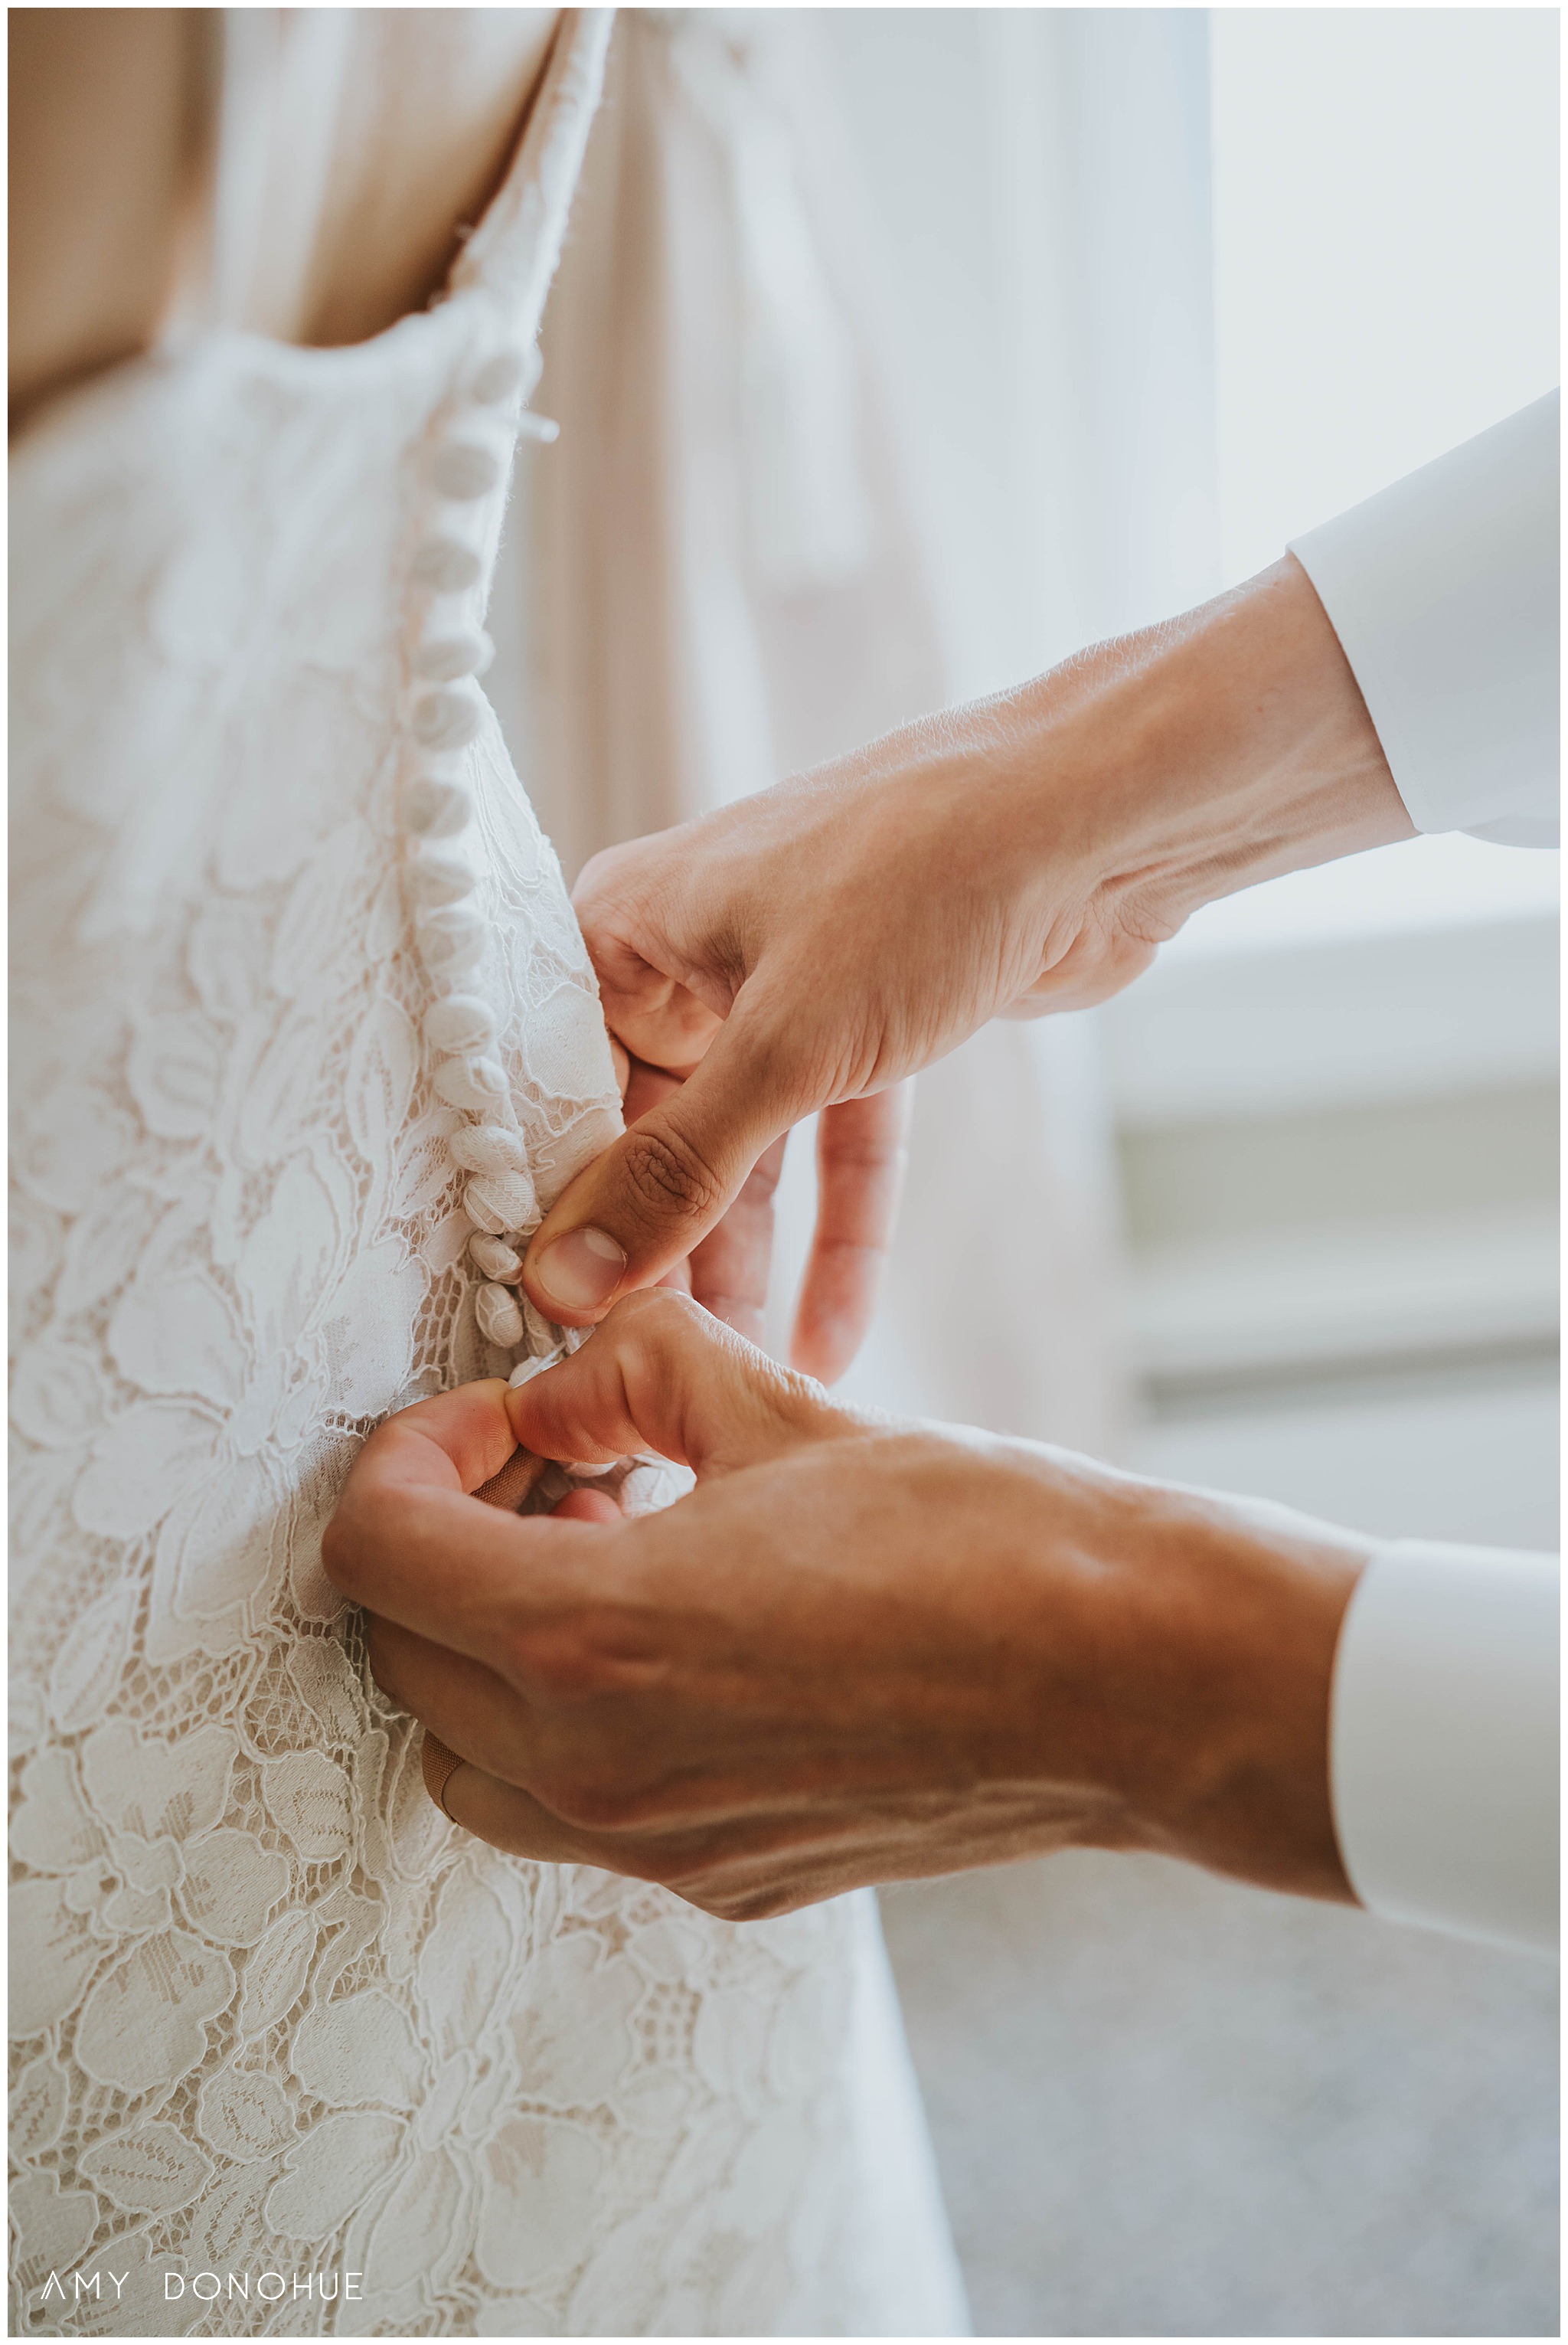 Getting Ready Details |The Fells Estate | New Hampshire Wedding Photographer | © Amy Donohue Photography